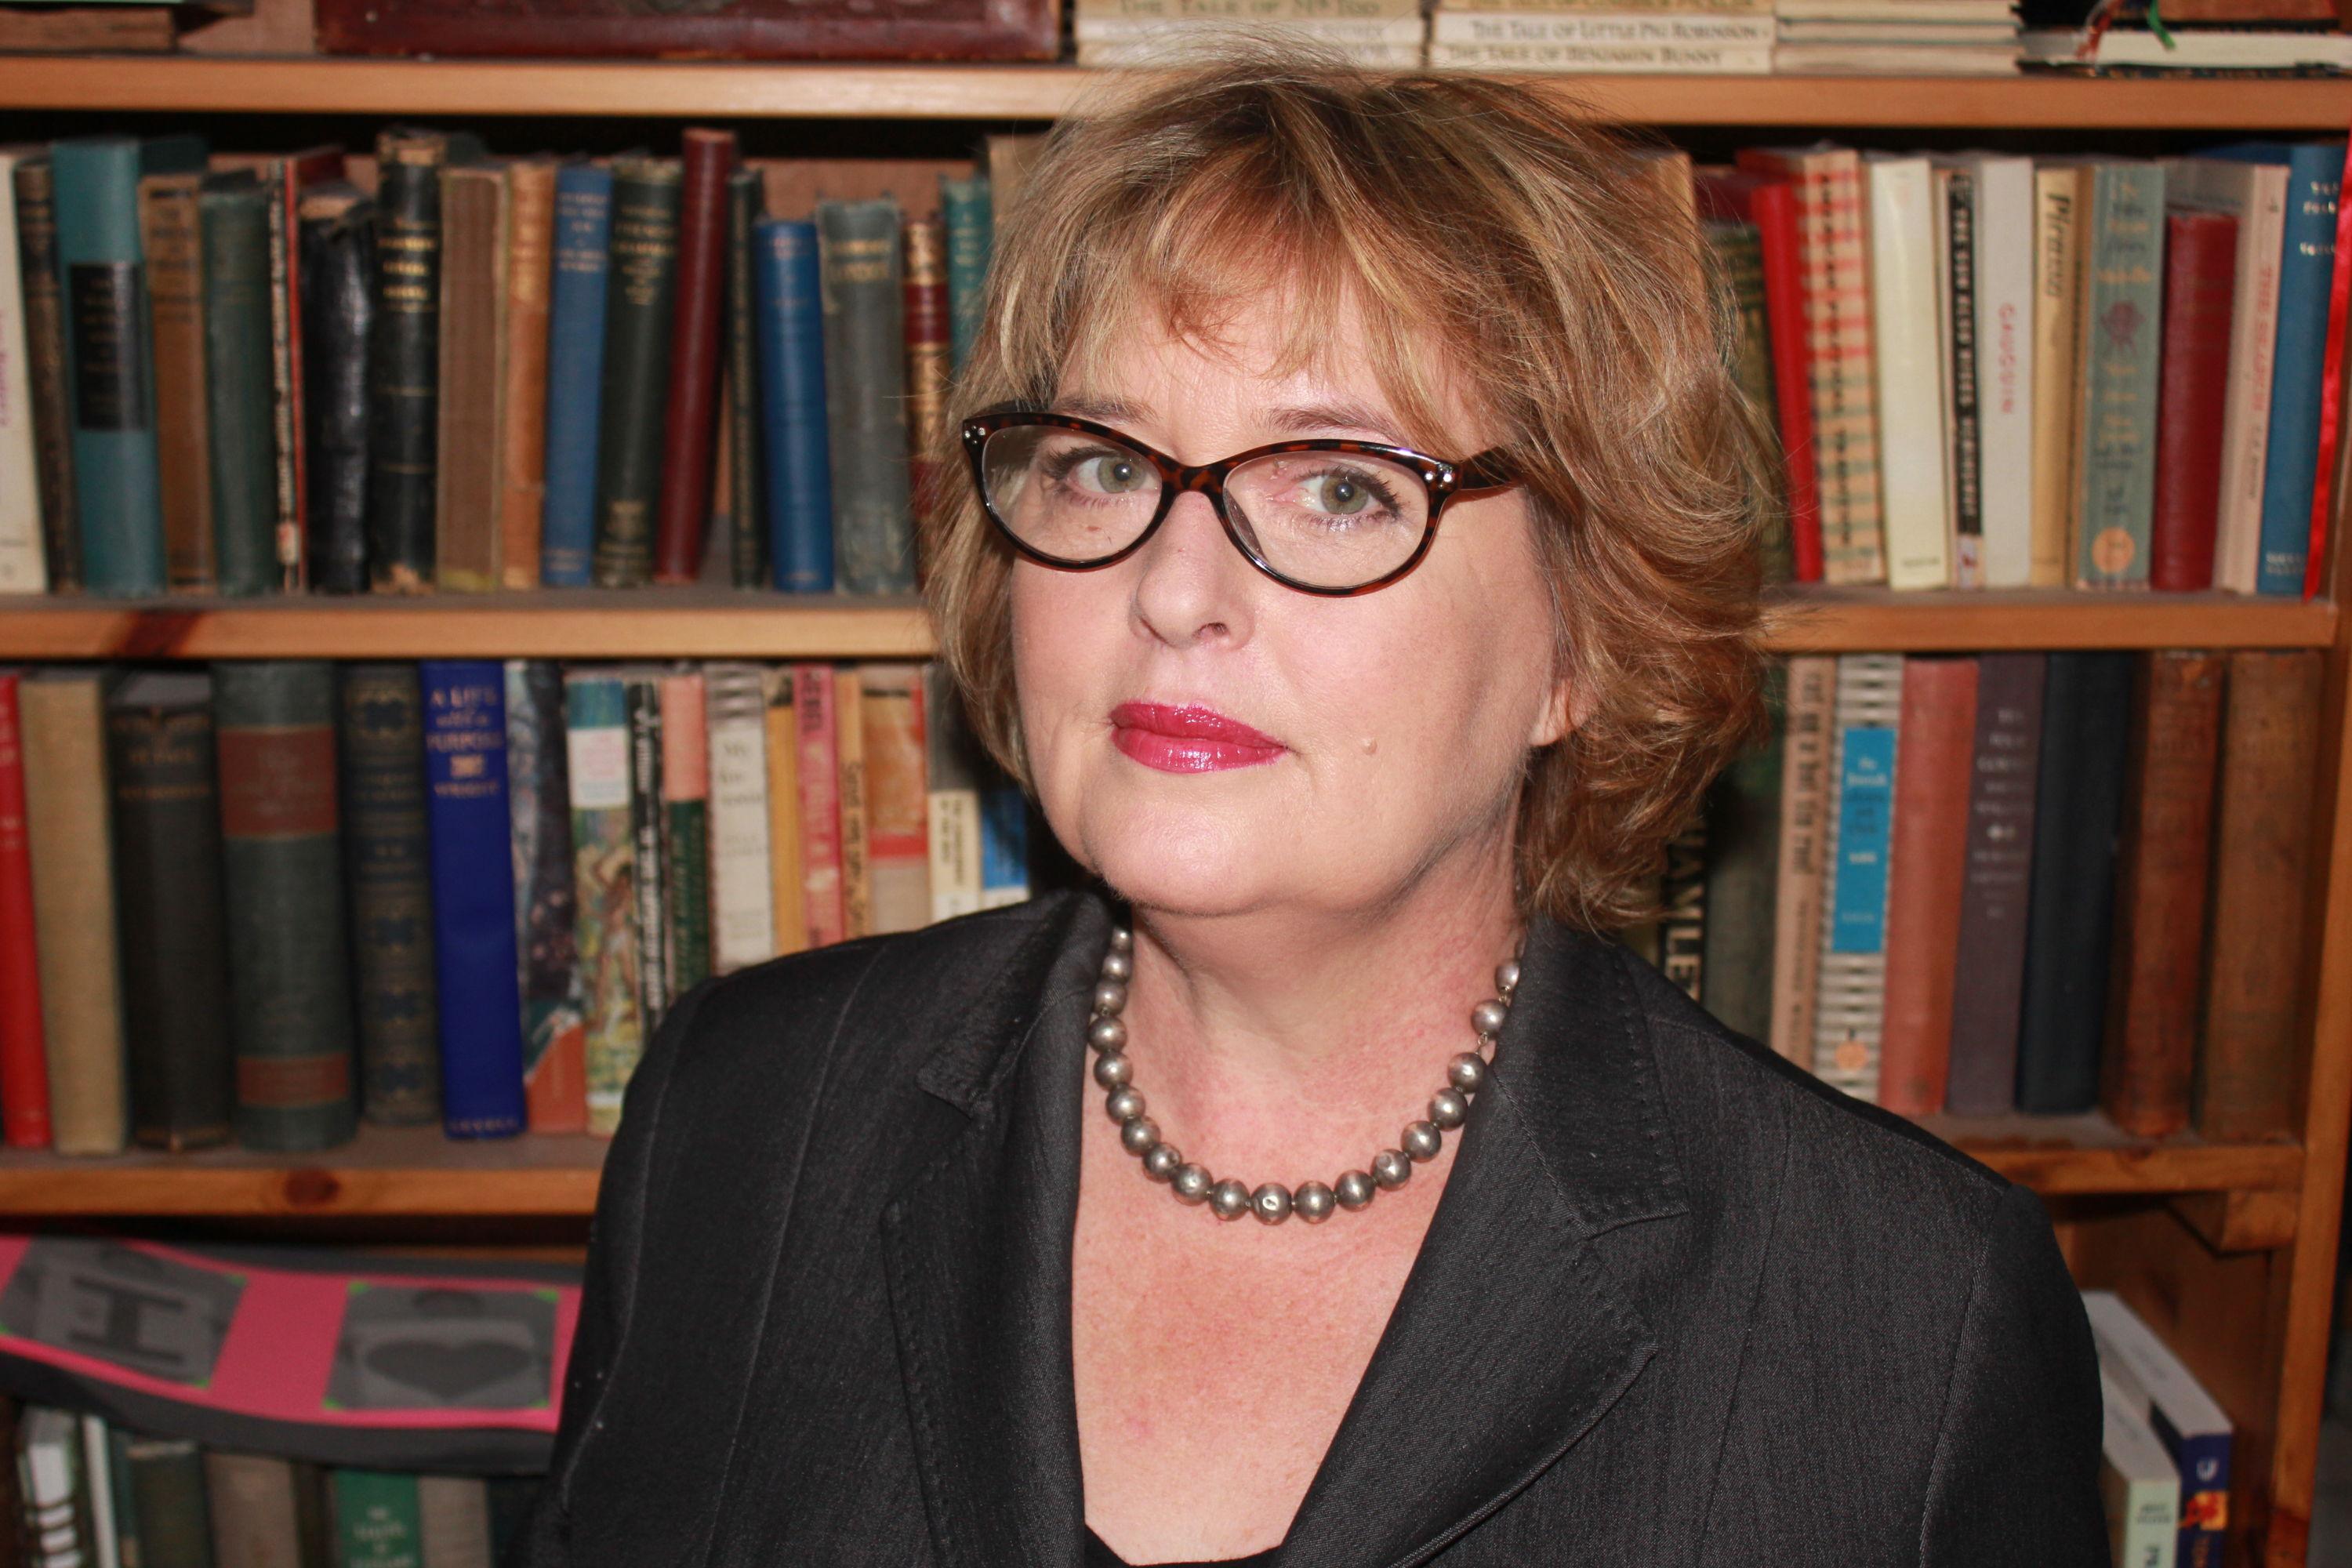 The Centre for Law and Social Justice hosts Professor Margaret Hall as a "Liberty Fellow"